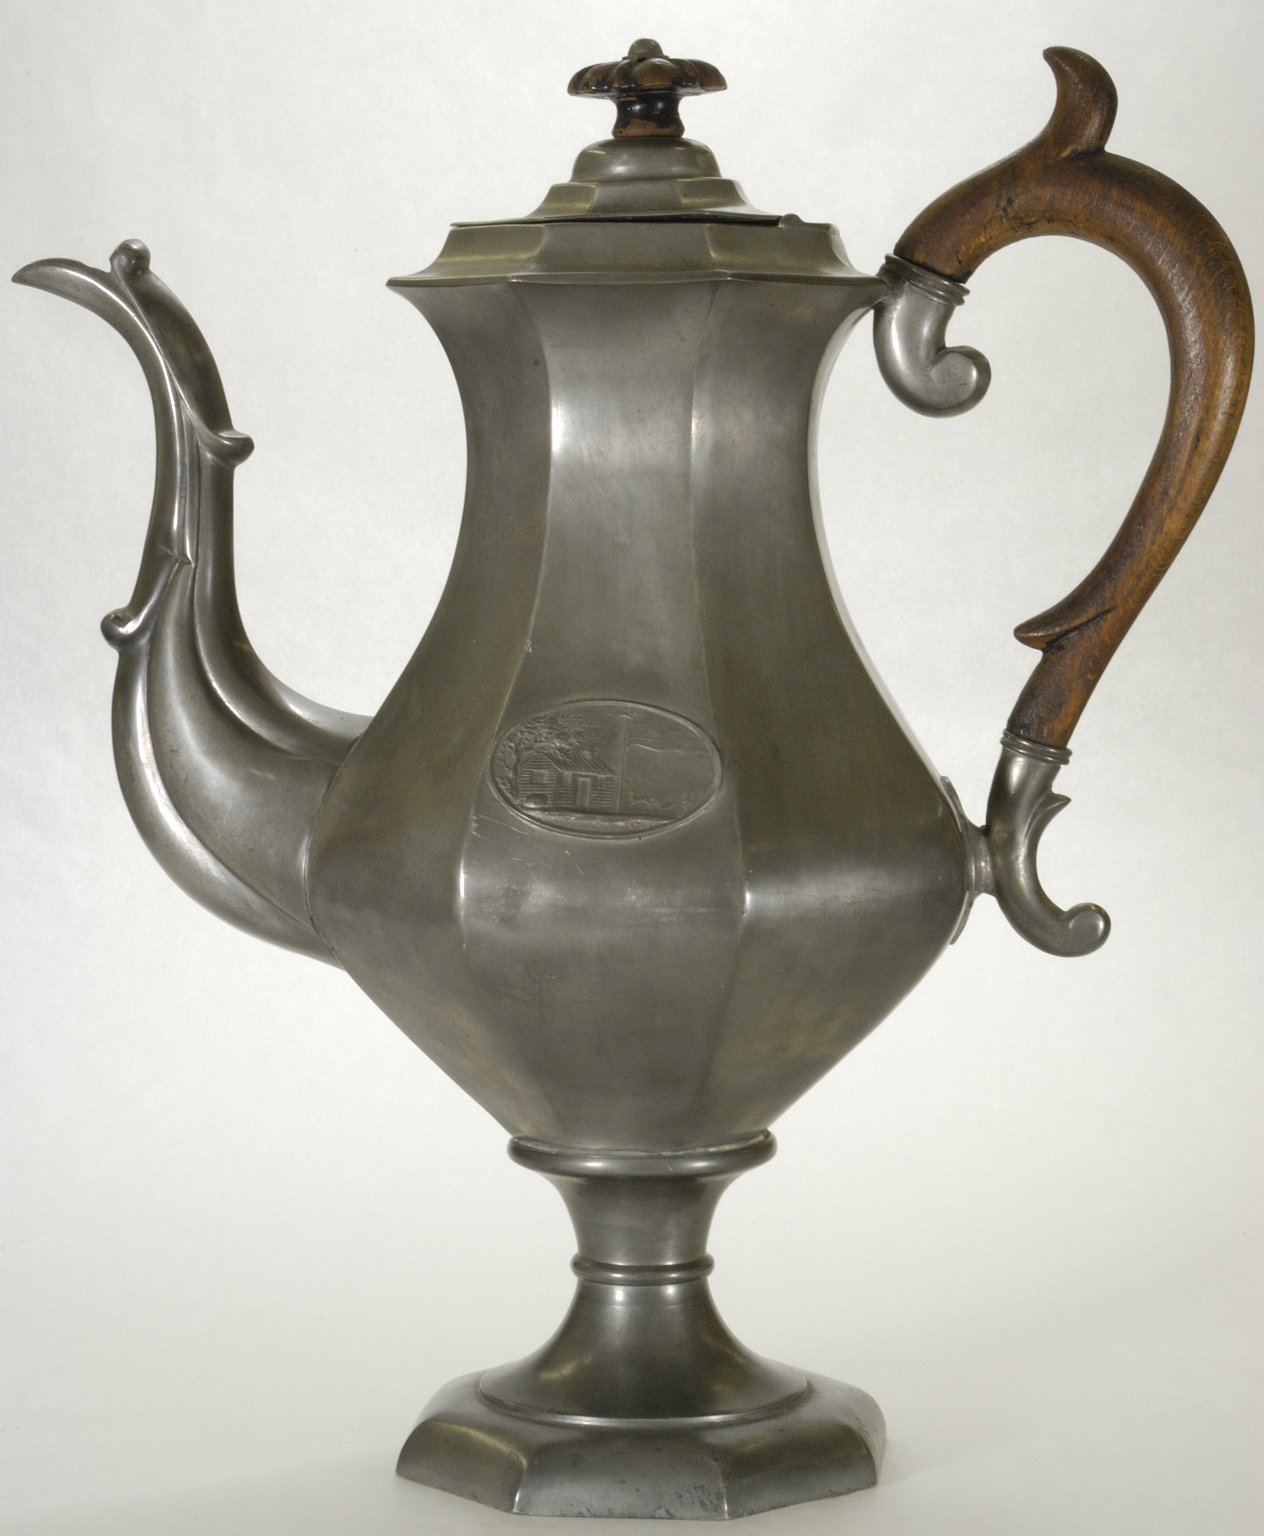 An image of a pewter teapot from 1840.